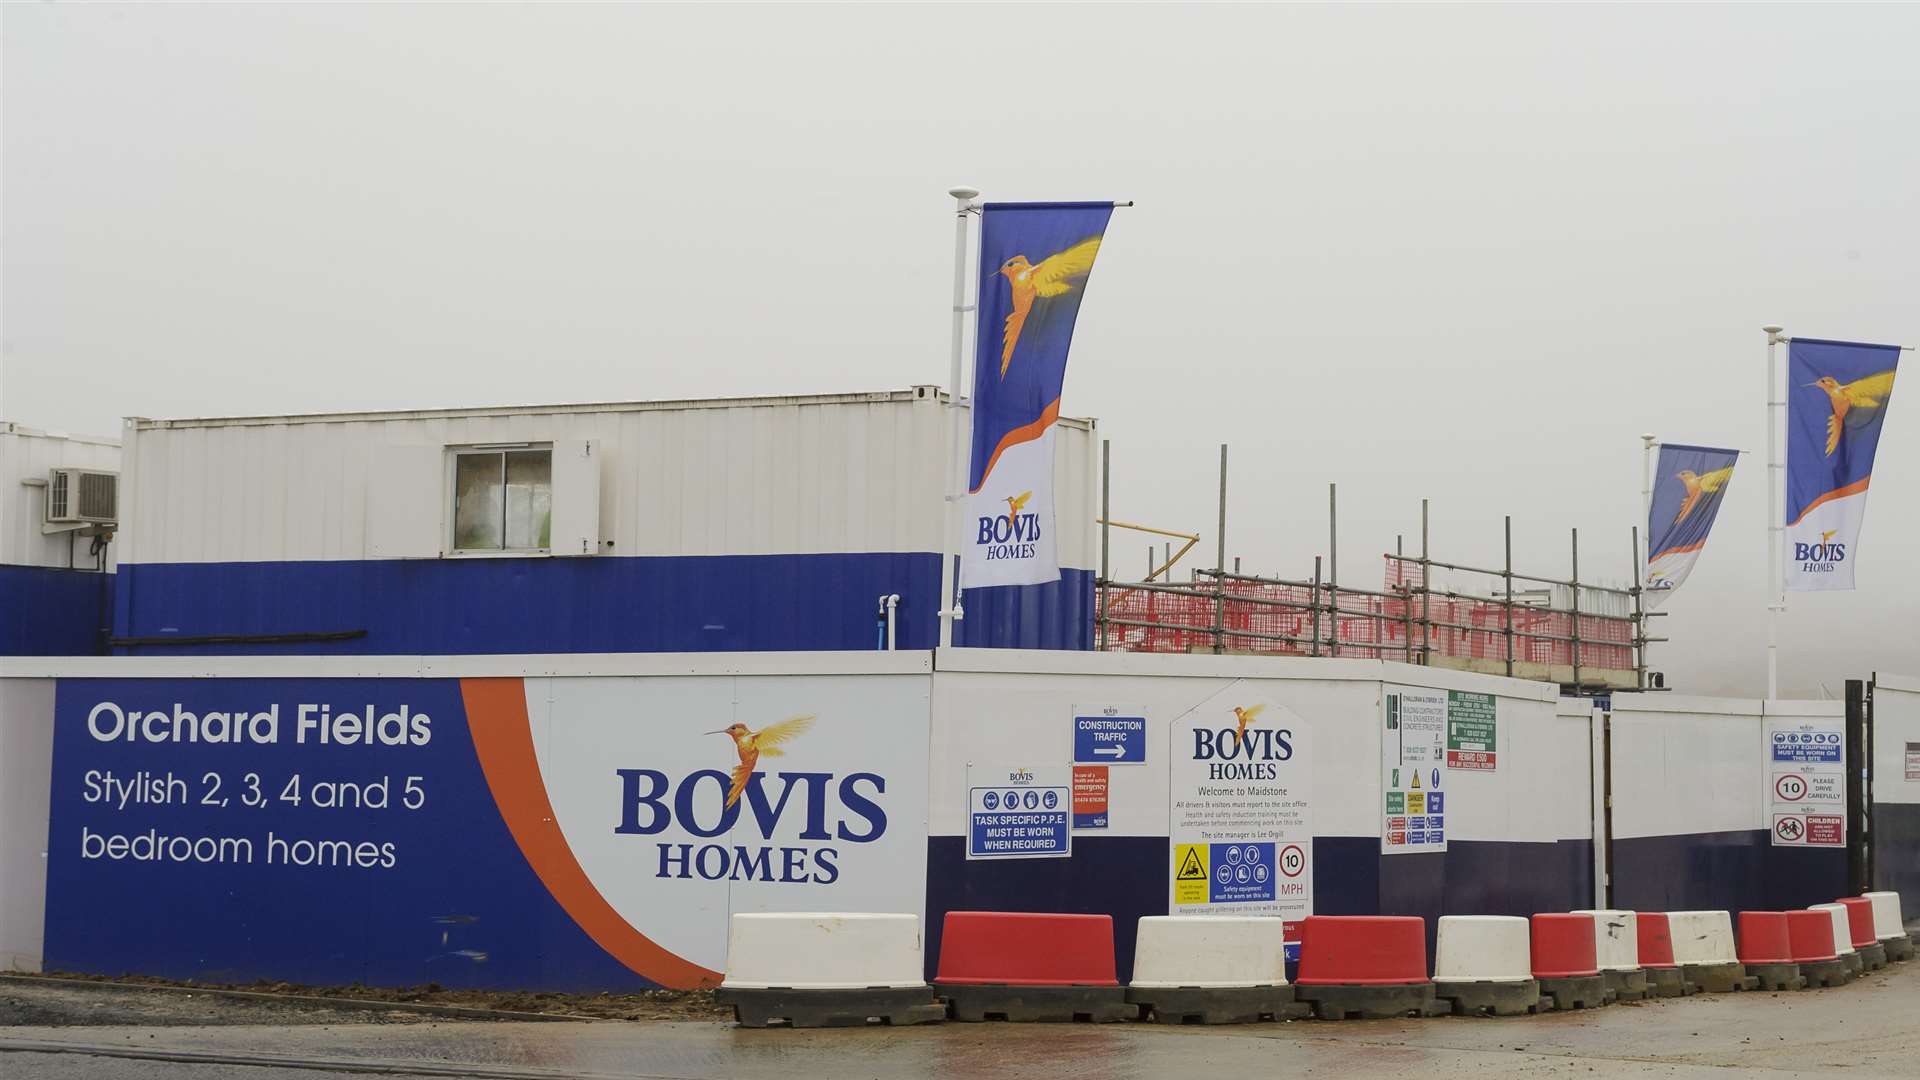 Bovis Homes is building at Orchard Fields in Maidstone